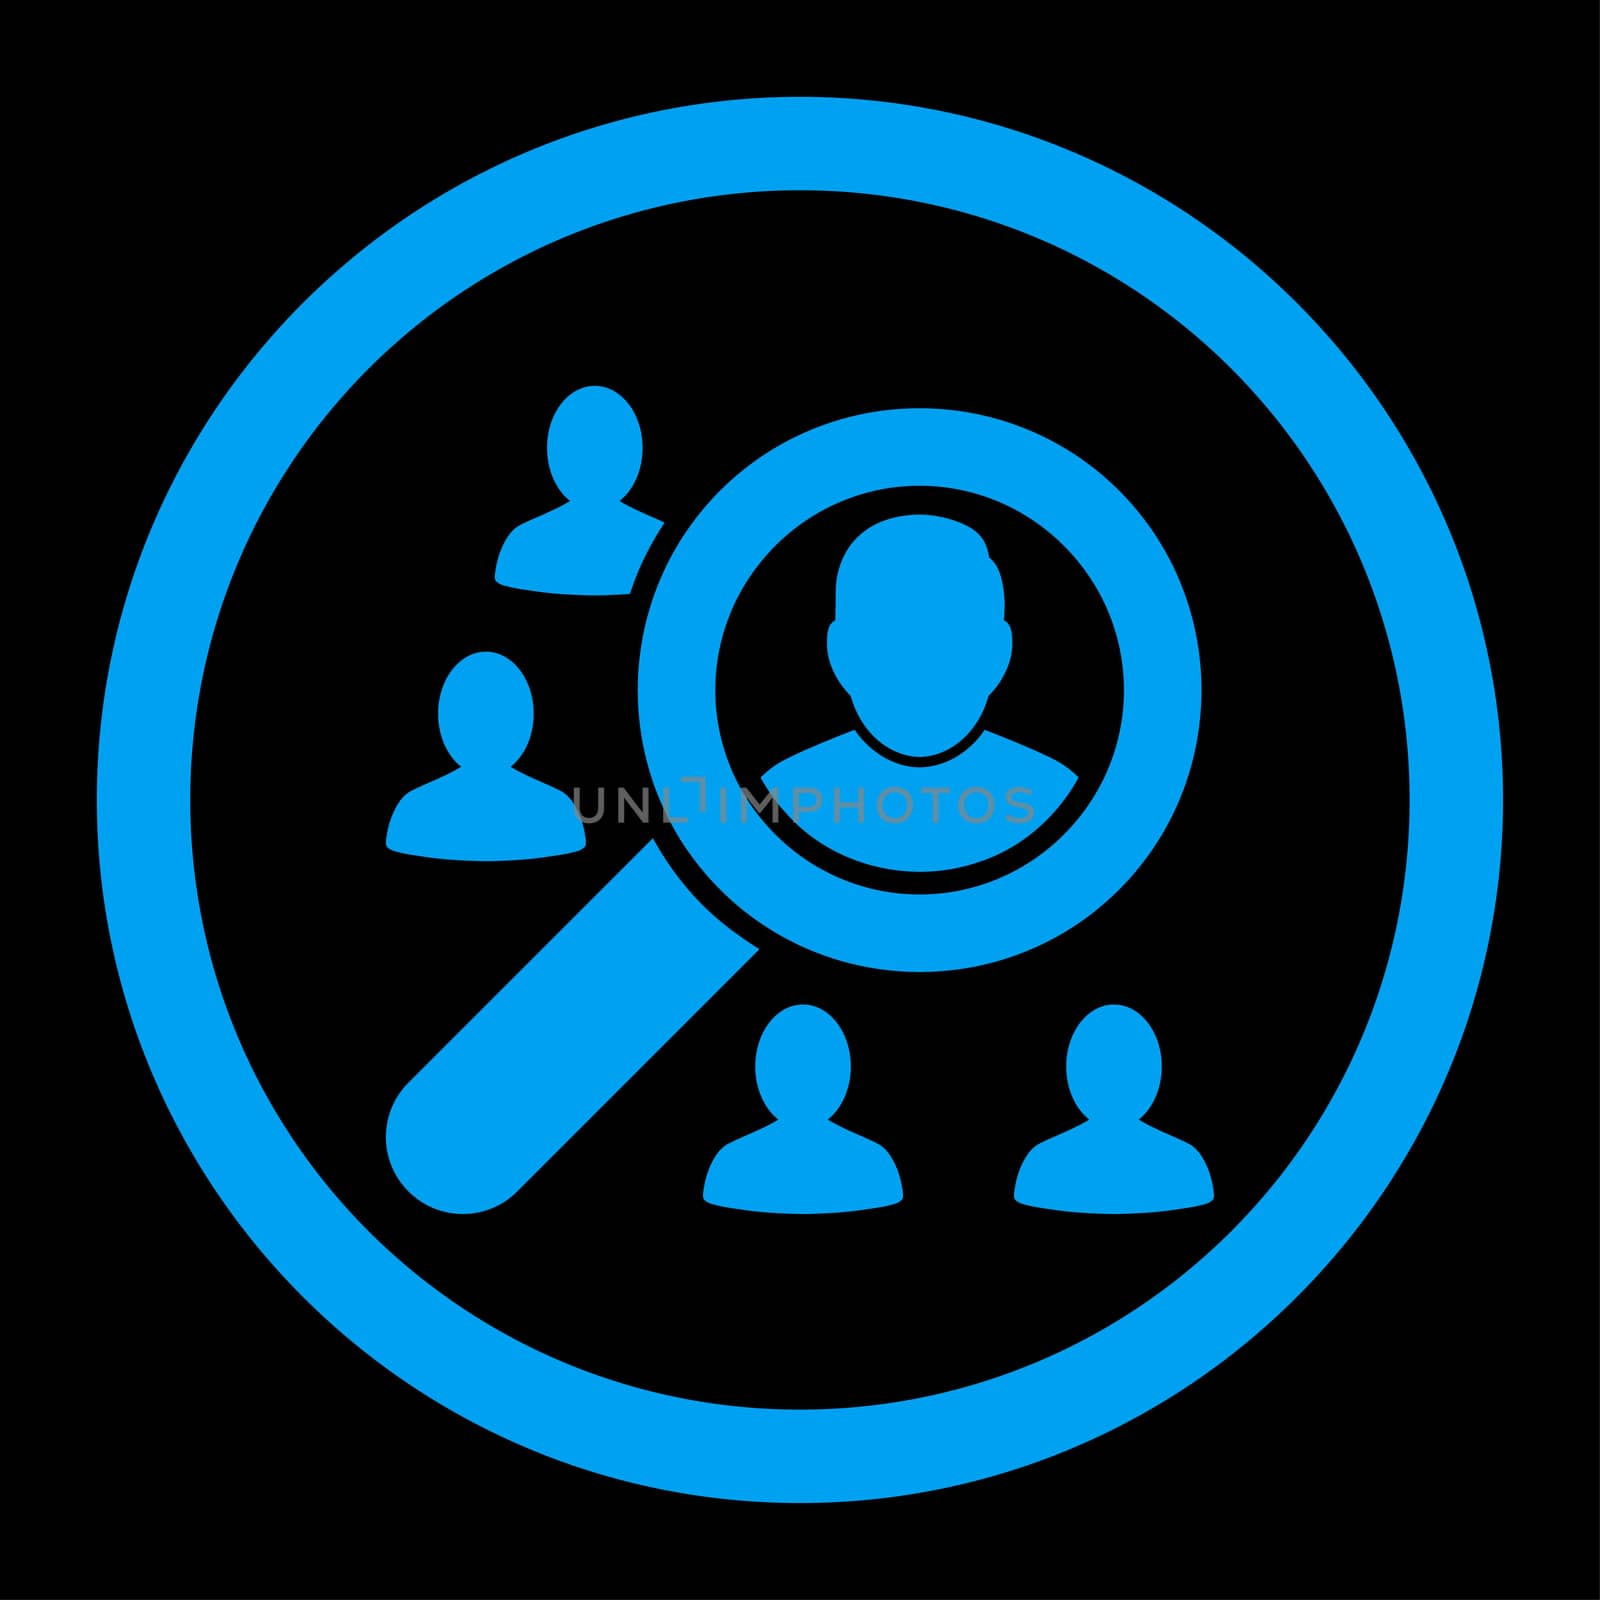 Marketing glyph icon. This rounded flat symbol is drawn with blue color on a black background.